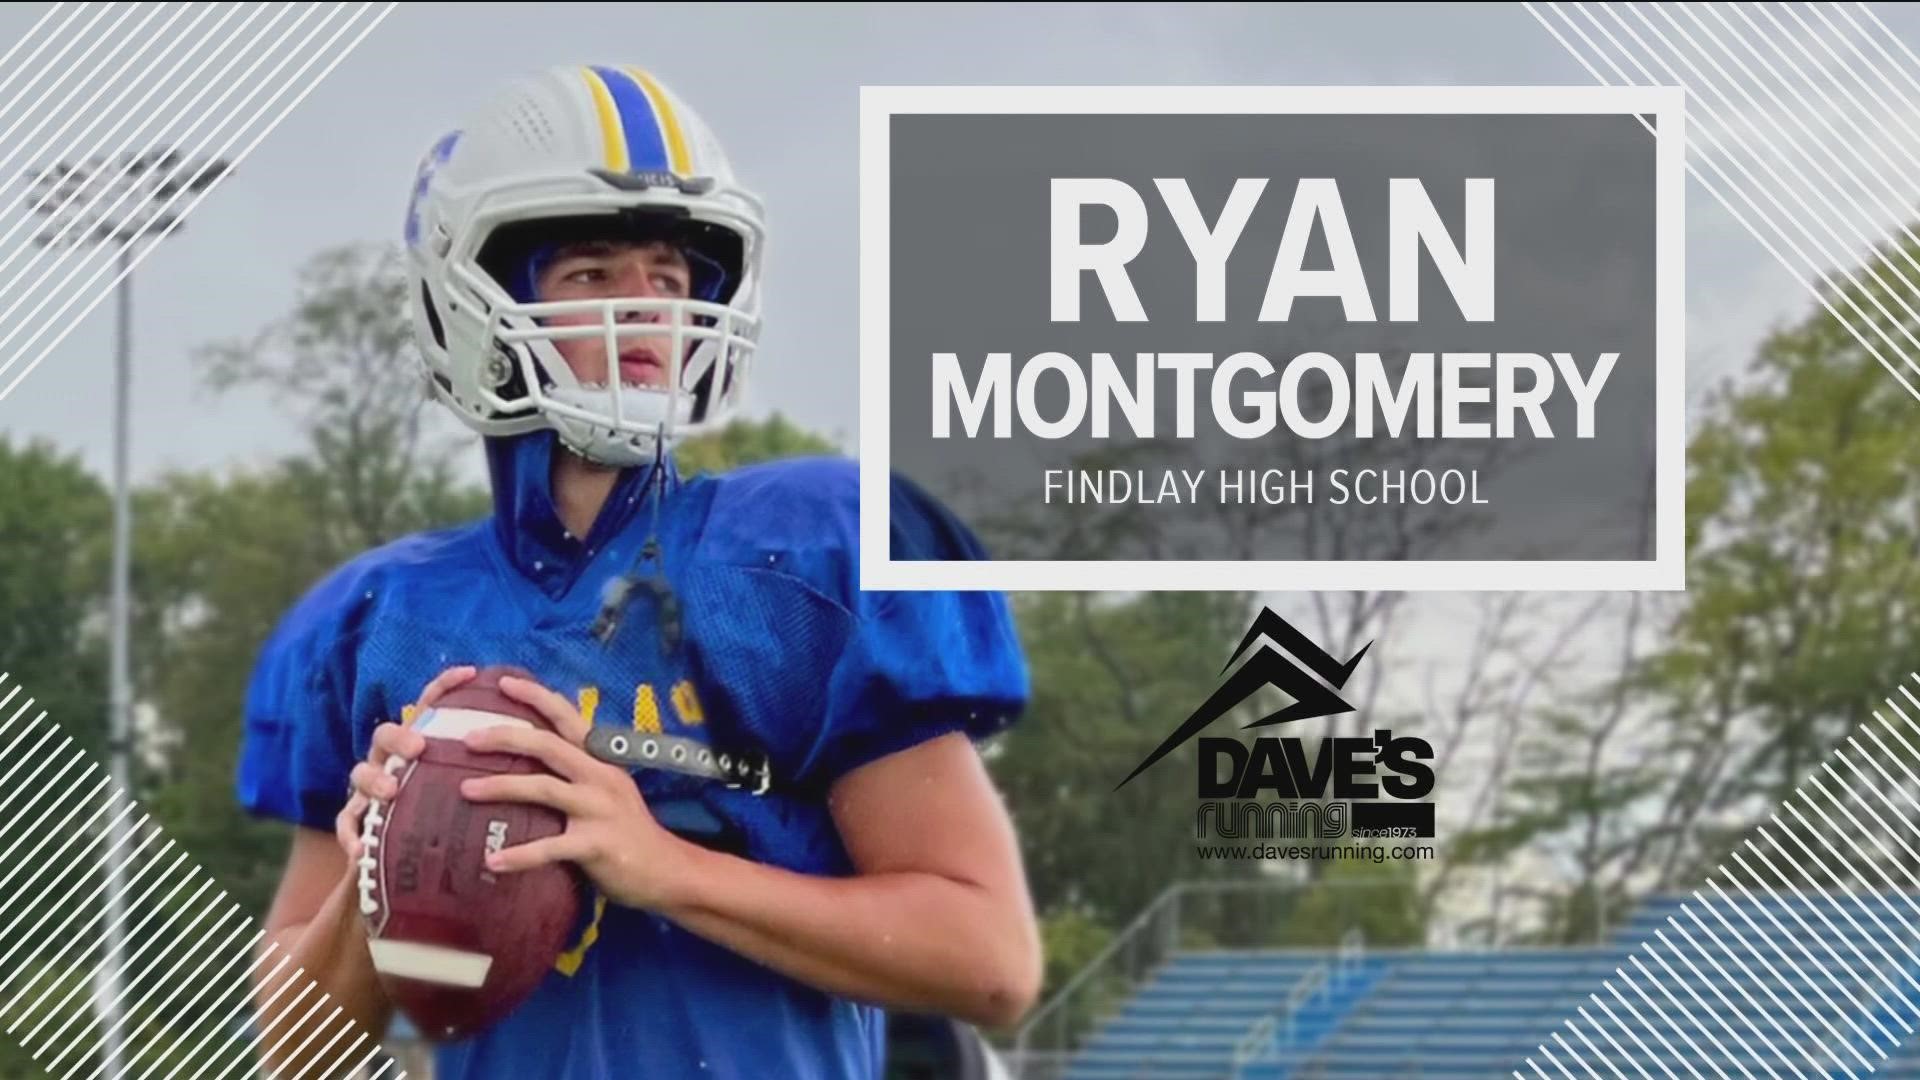 The sophomore quarterback has offers from Michigan, Notre Dame, Ohio State & Toledo.